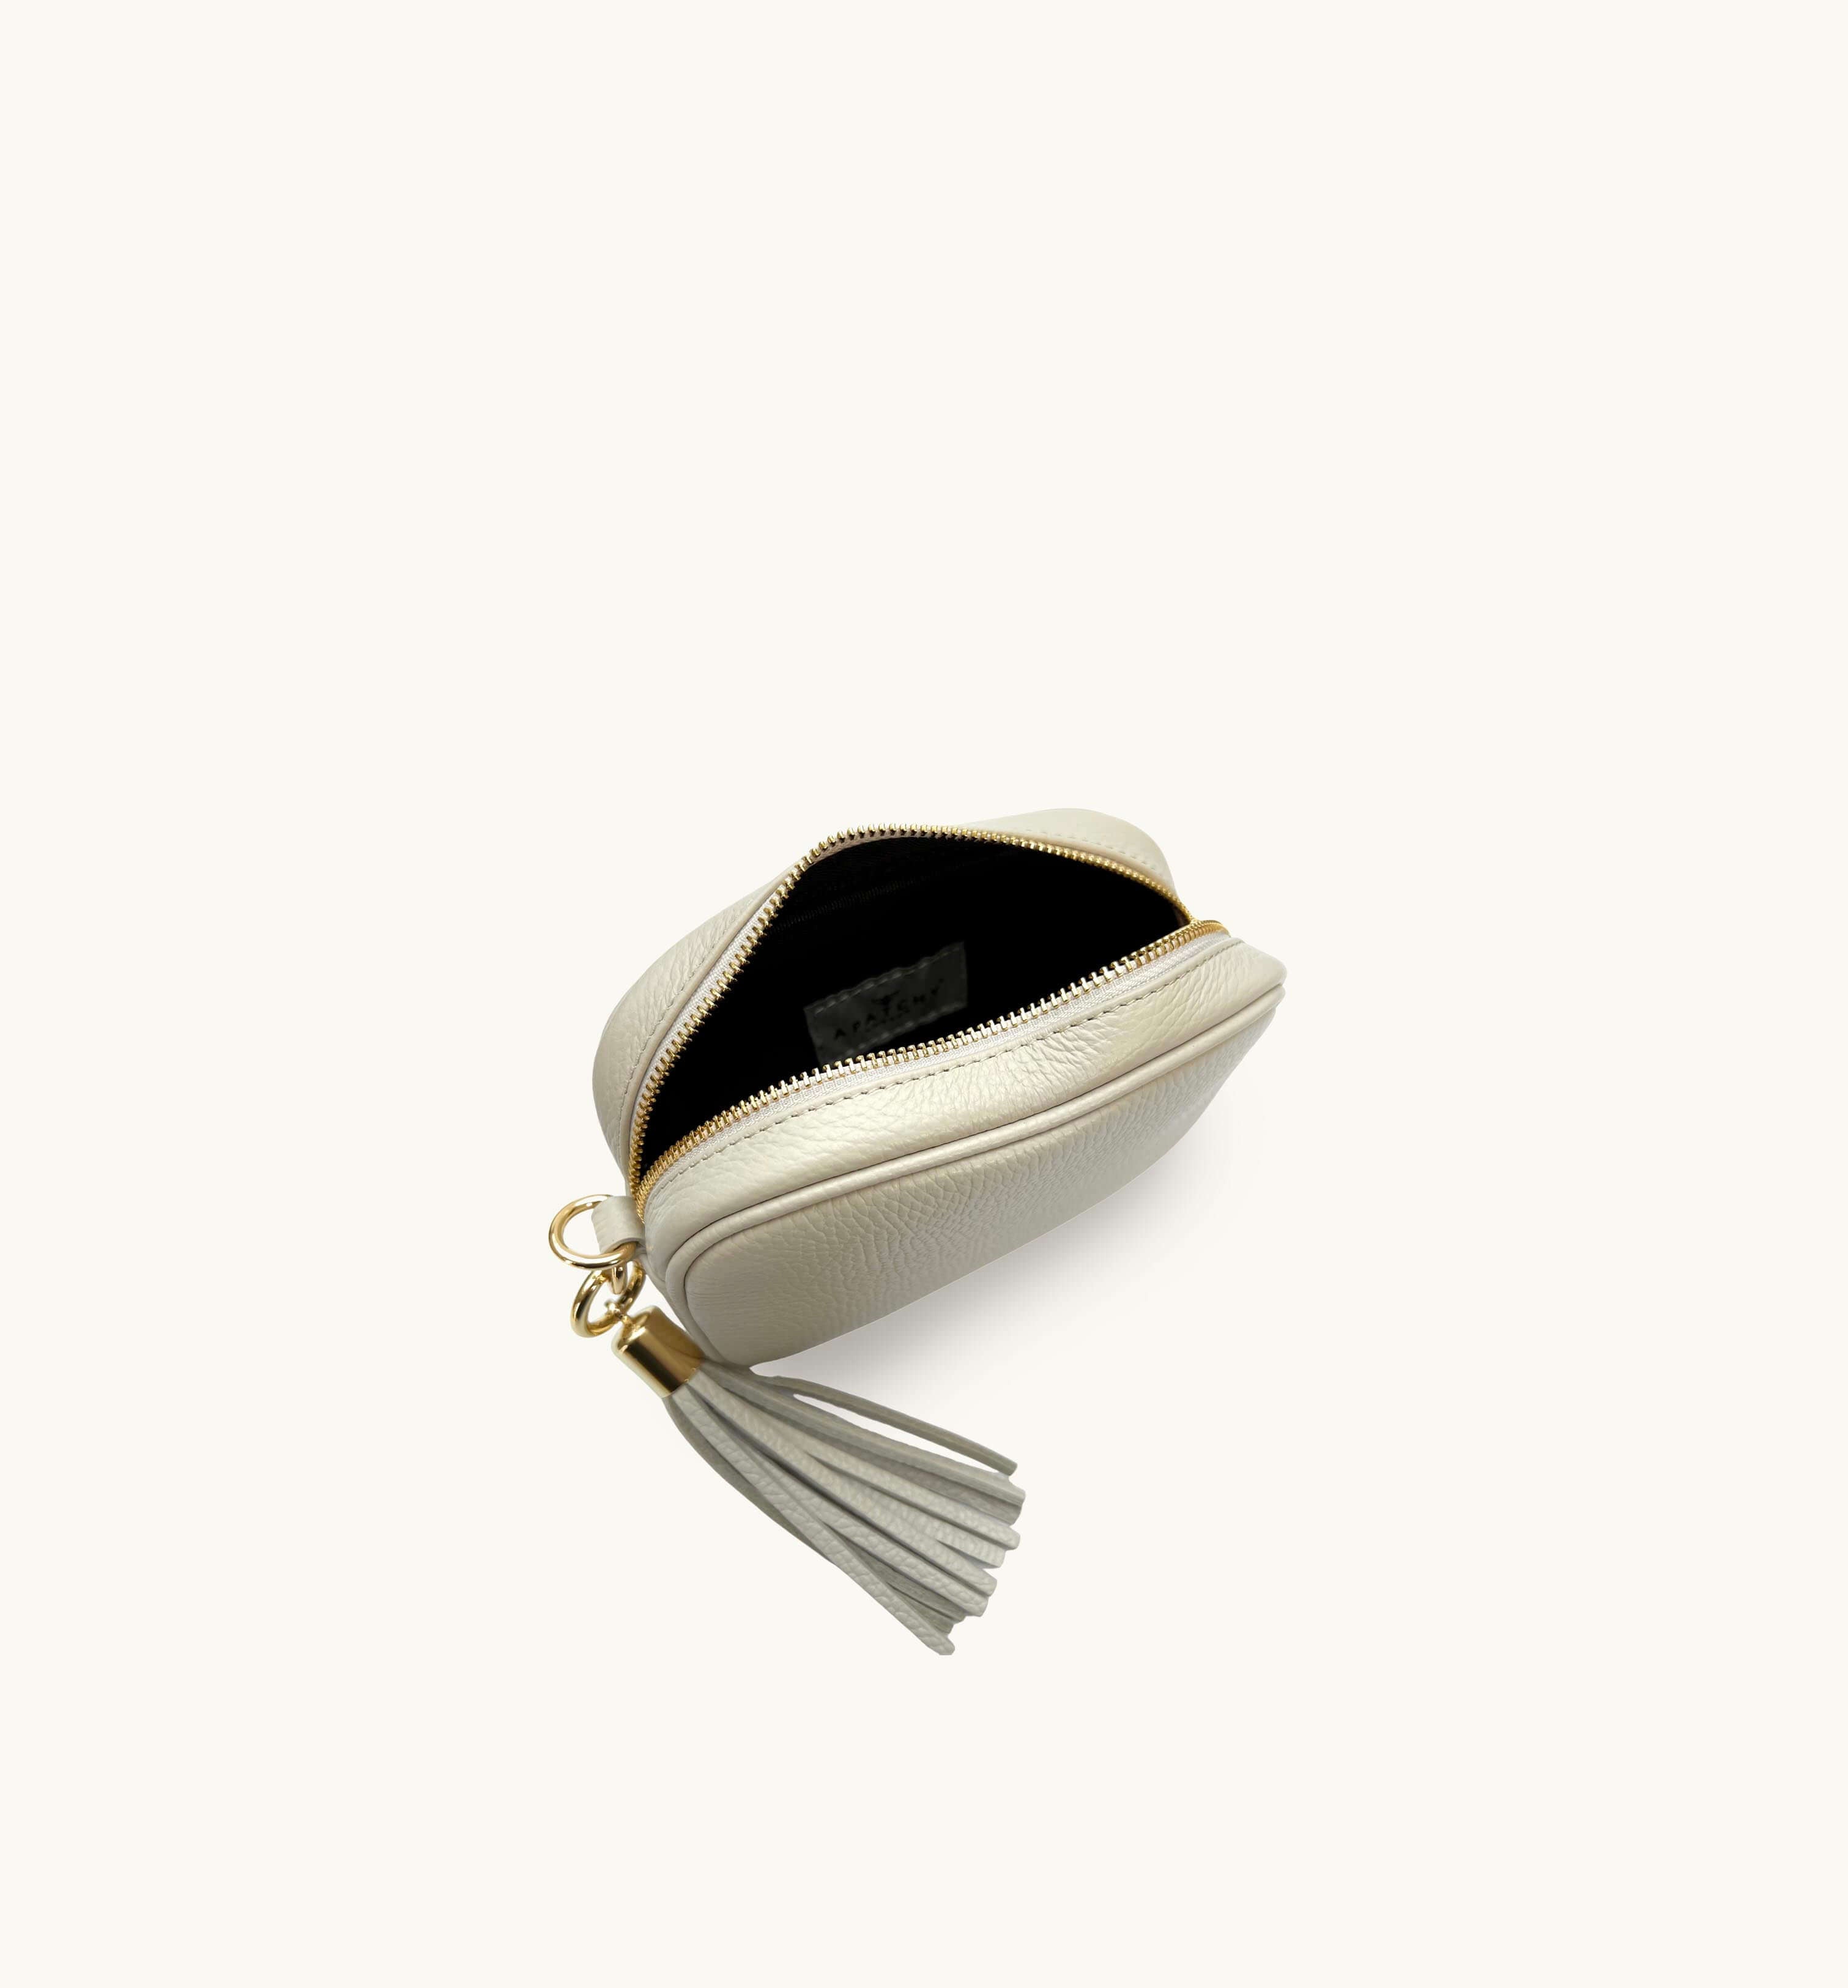 The Mini Tassel Stone Leather Phone Bag With Gold Chain Strap